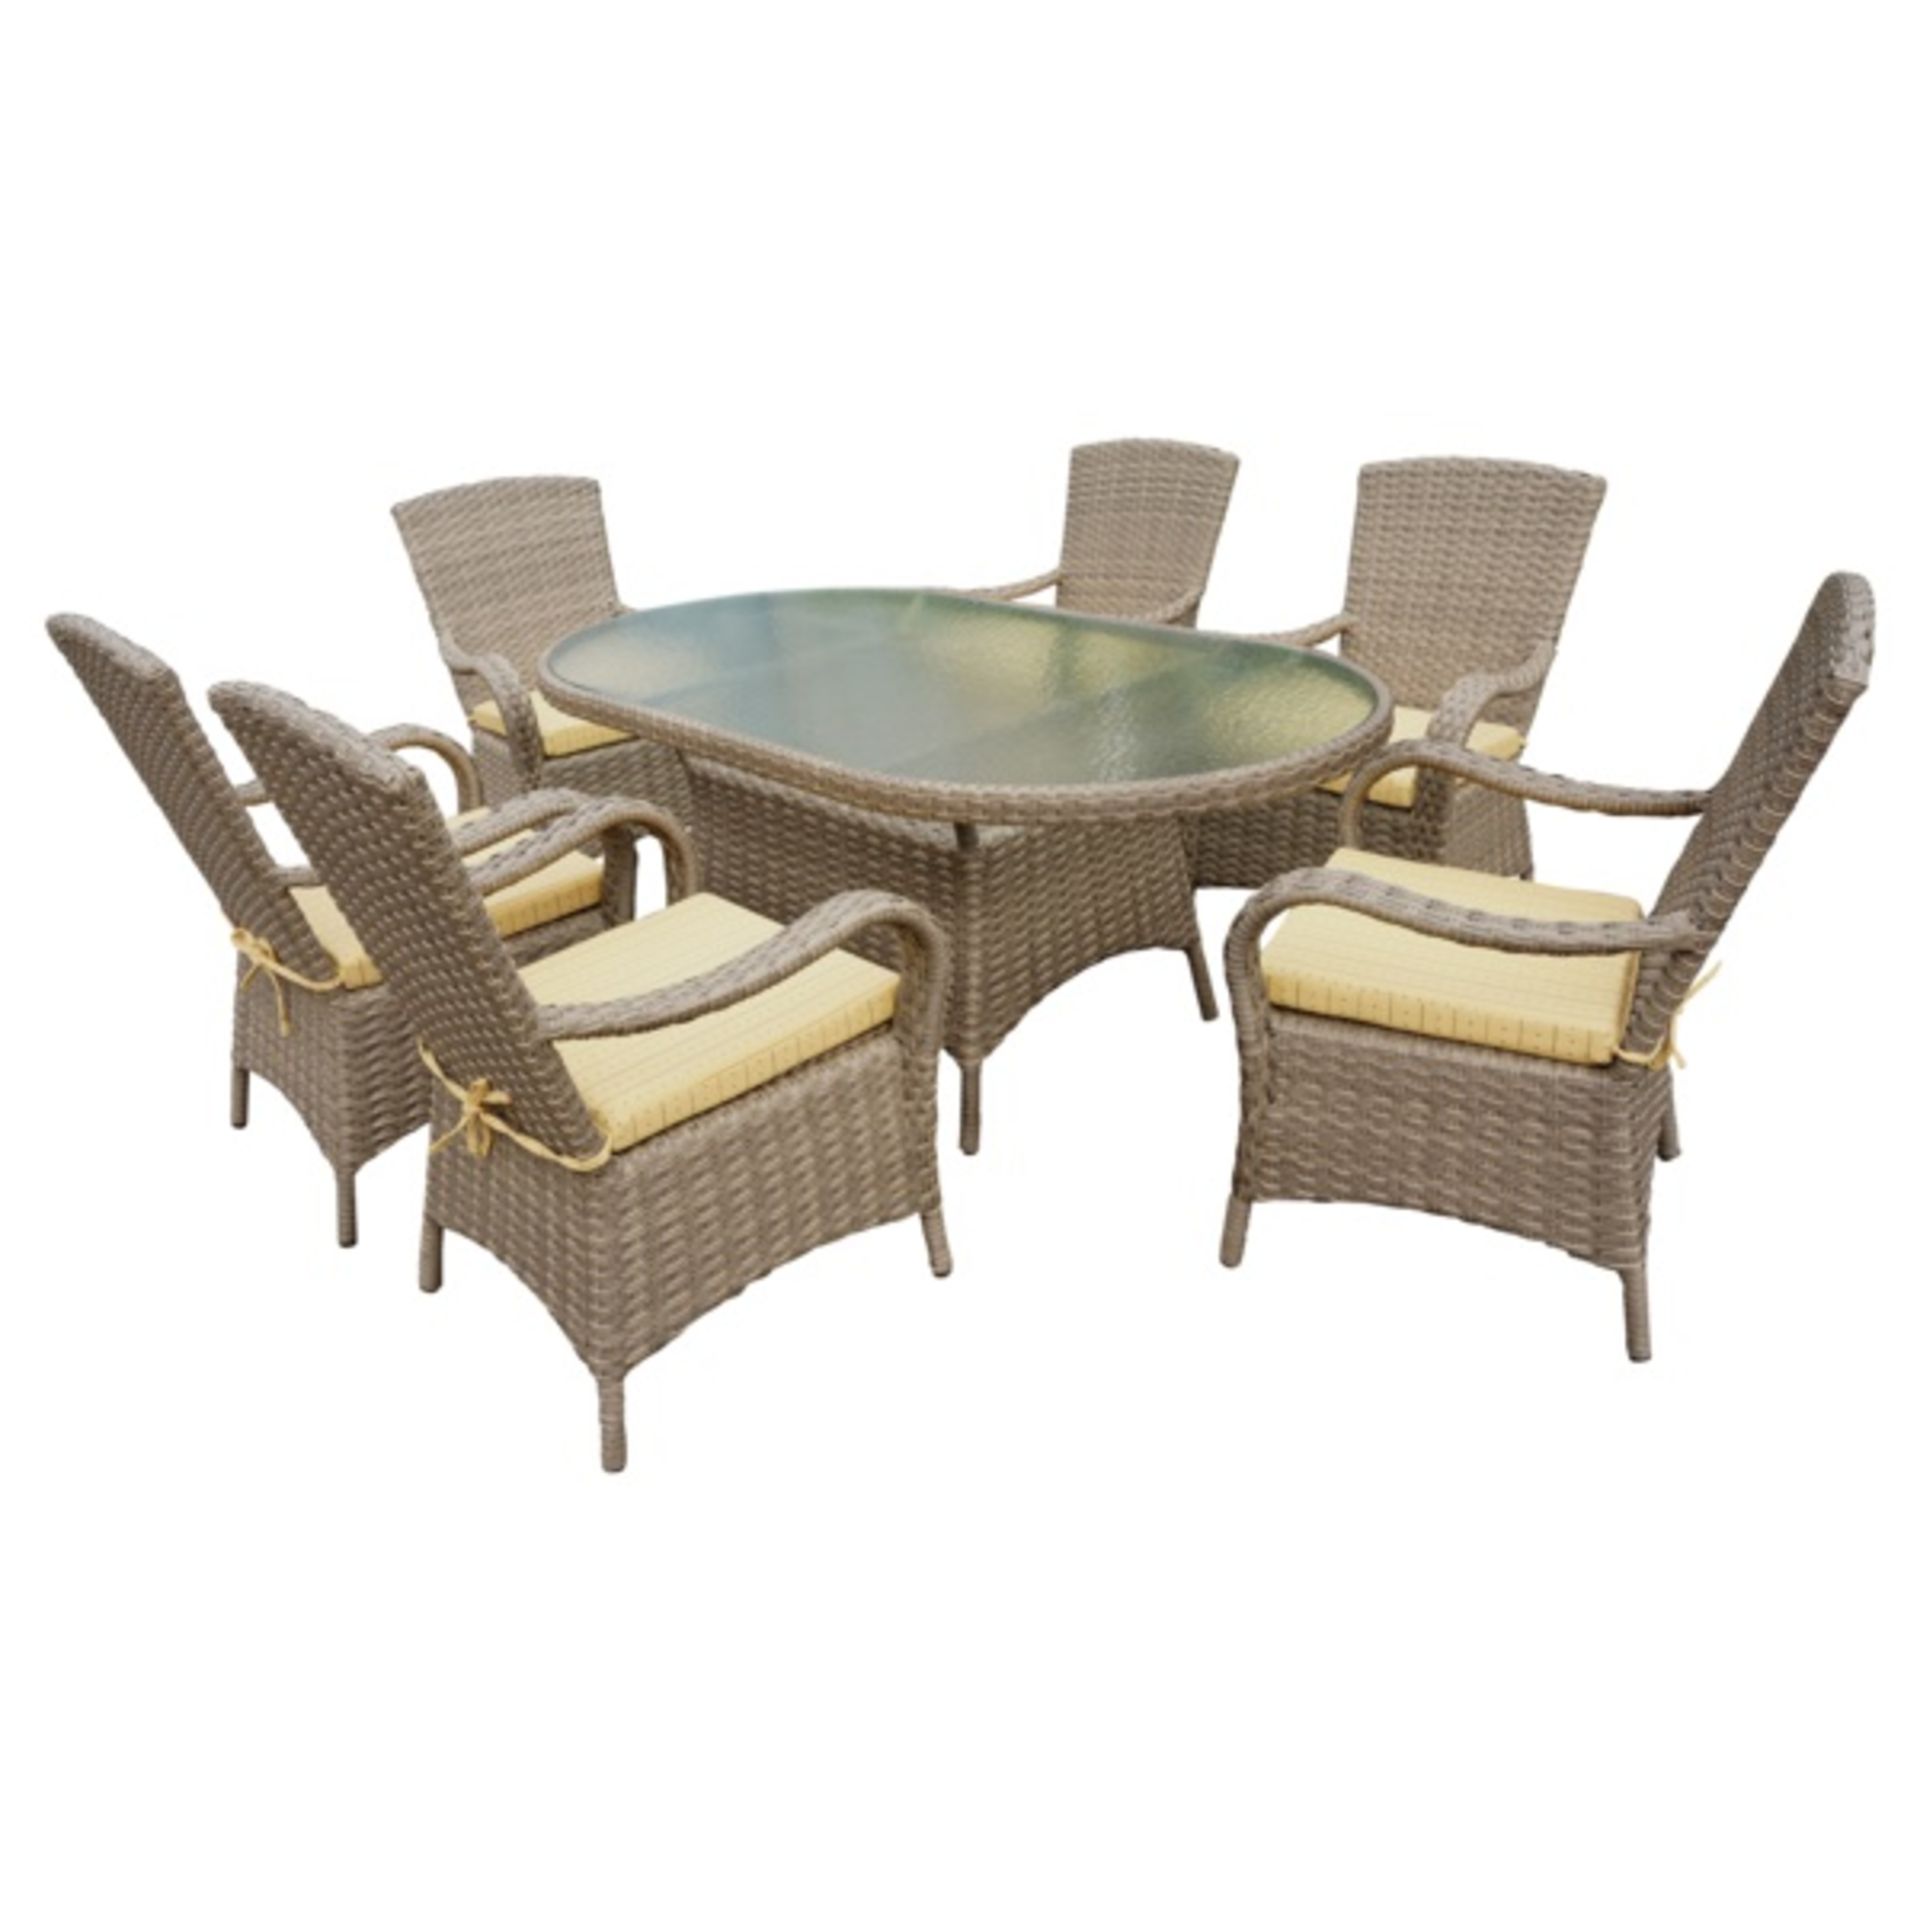 V Brand New BEIGE RATTAN OVAL 180CM TABLE SET WITH 6 CHAIRS & LUXURY OUTDOOR PERFORMANCE CUSHIONS